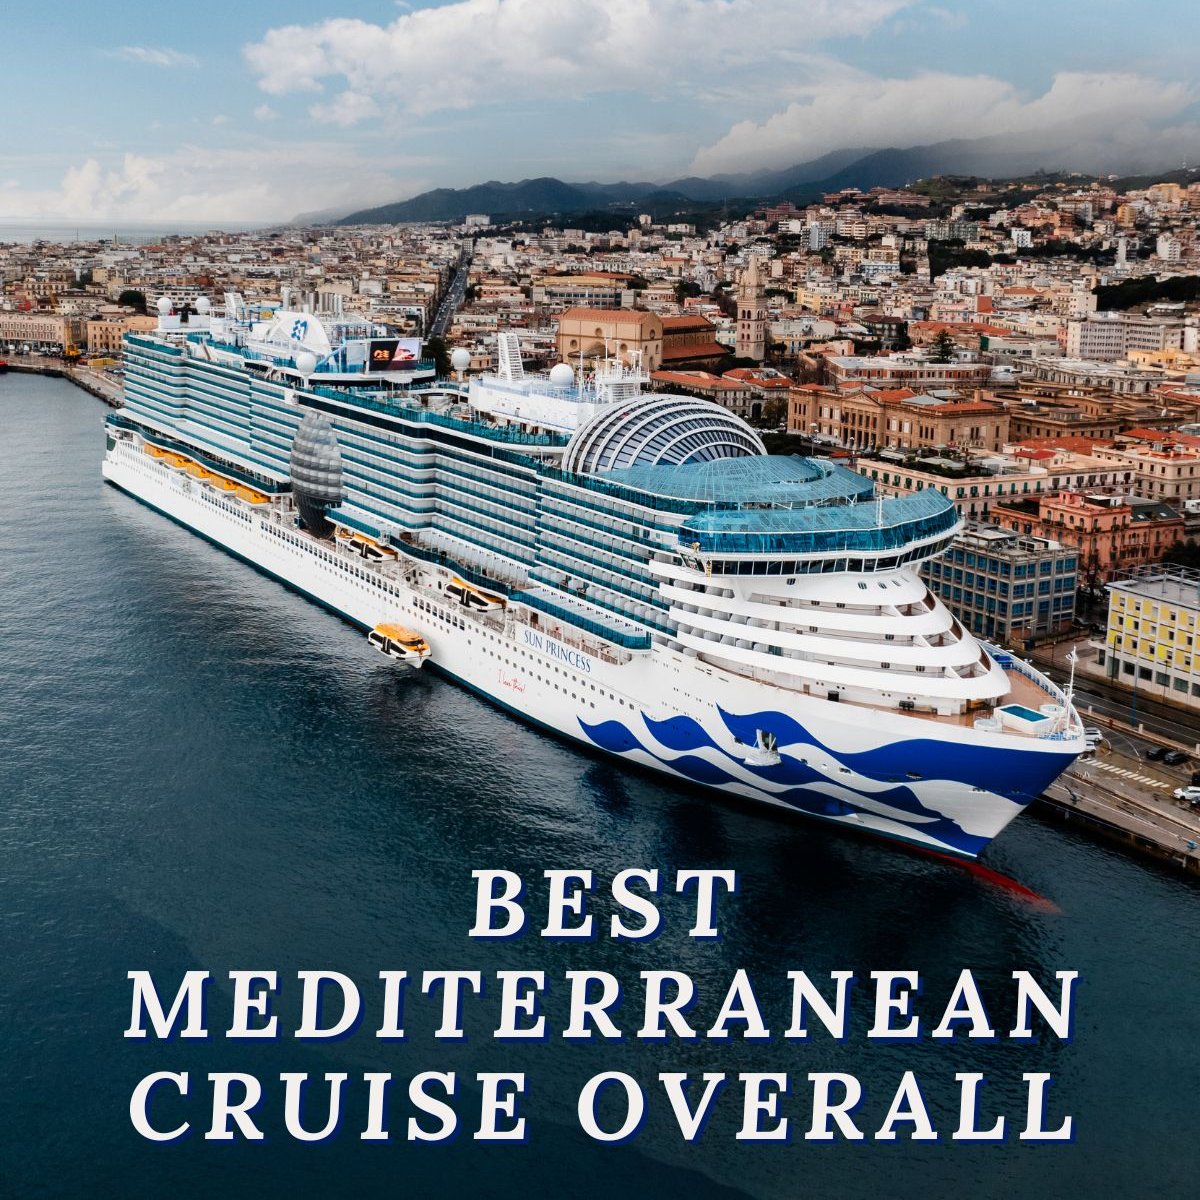 🎉 We're bursting with pride! #SunPrincess has been named “Best Mediterranean Cruise Overall” by @Forbes 🏆 This incredible achievement is a testament to our fantastic crew's unwavering dedication and our partners' invaluable support, leading to unforgettable experiences for our